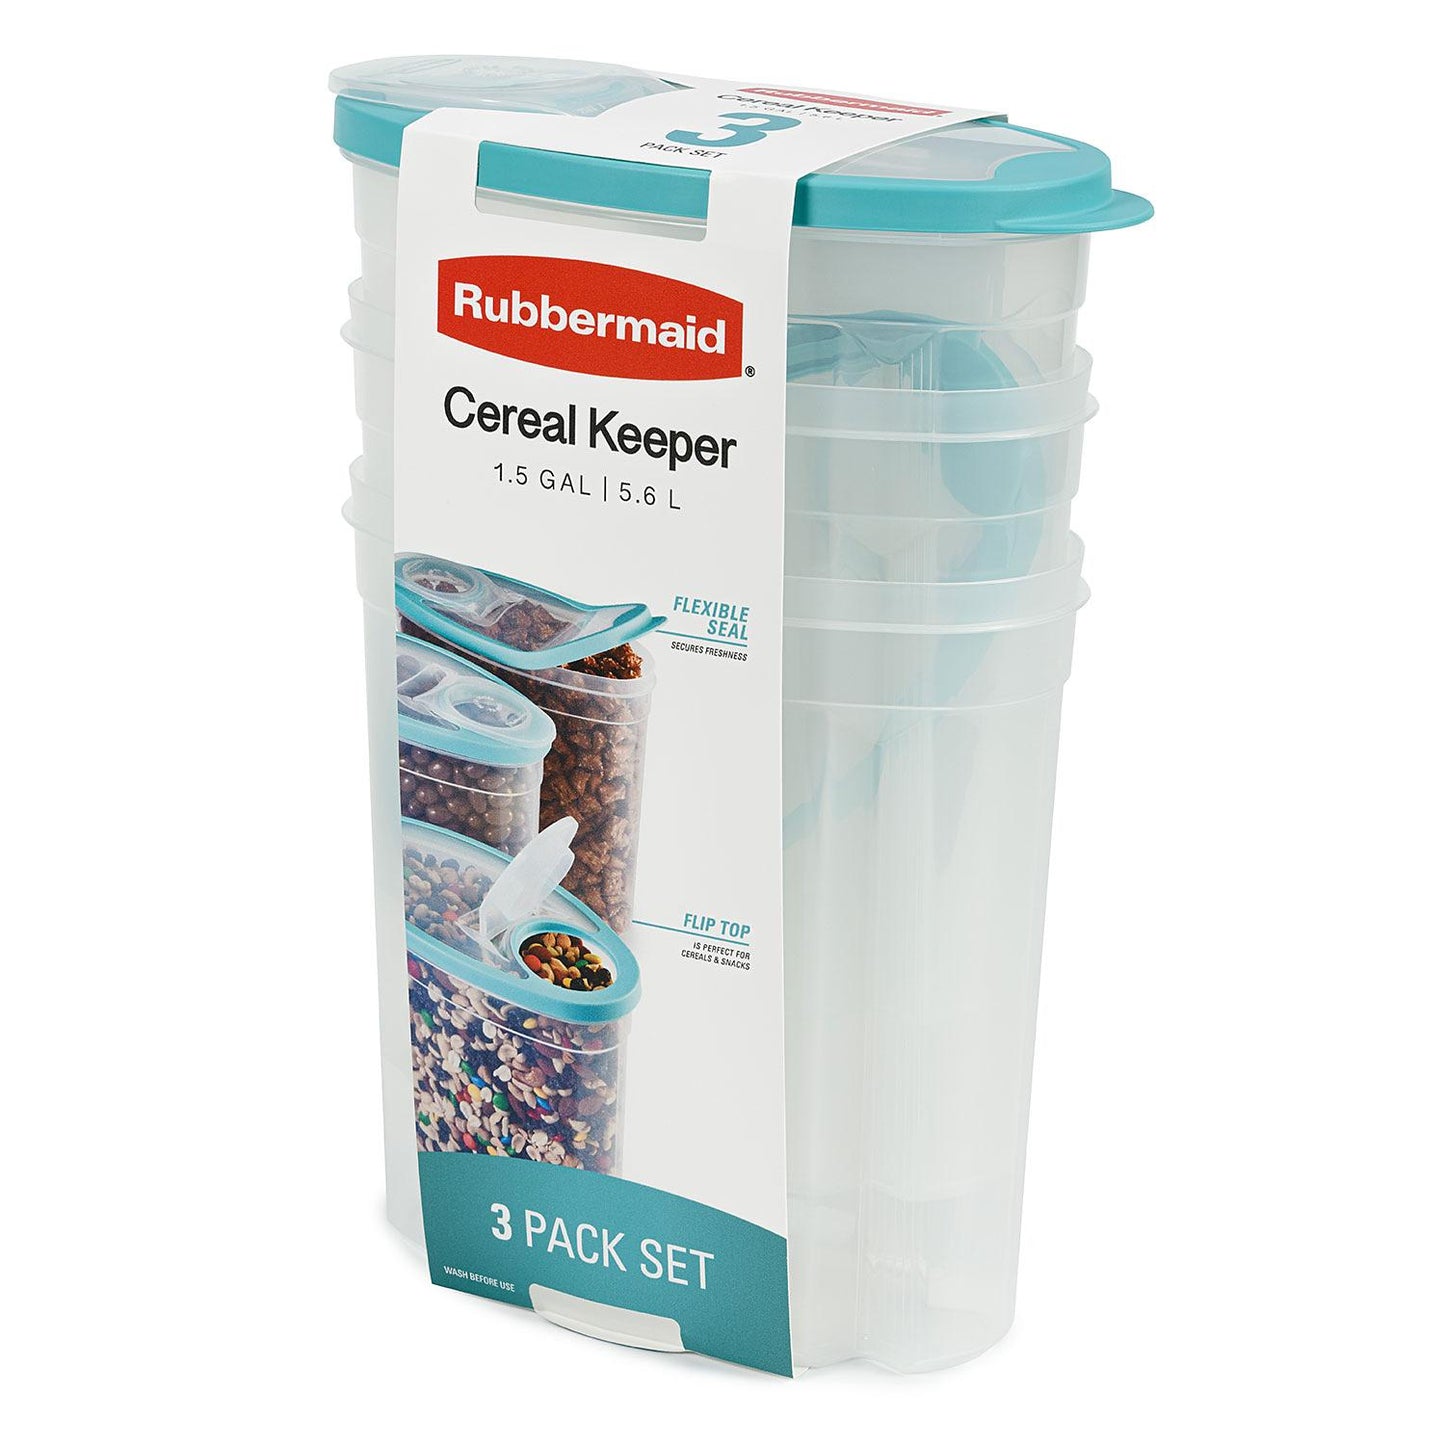 Rubbermaid® Cereal Keeper Storage Container, 1.5 gal - King Soopers